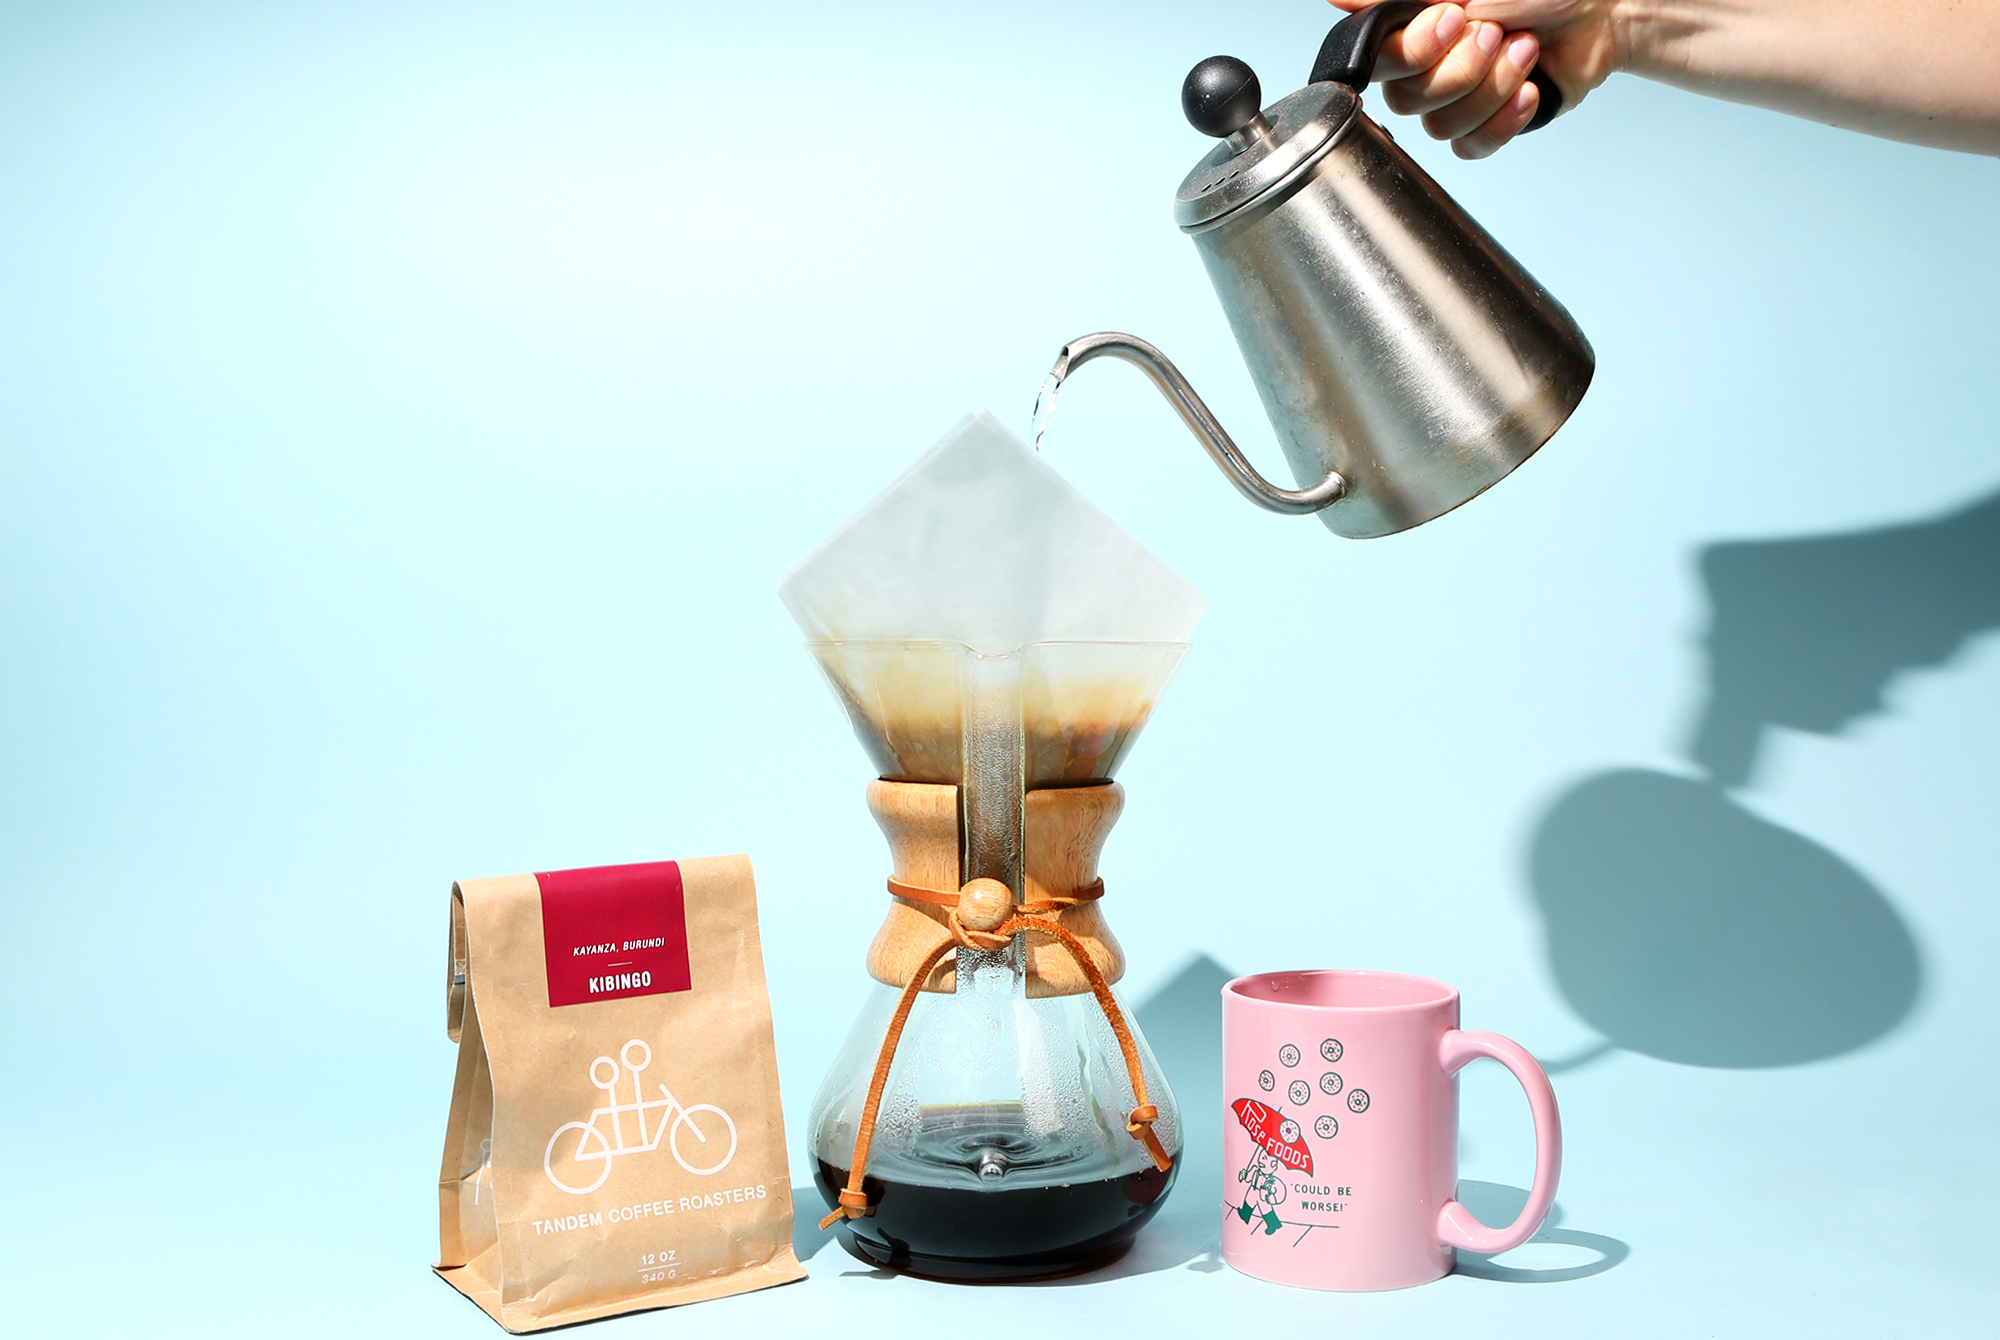 Brewing Guide: How To Make Chemex Coffee